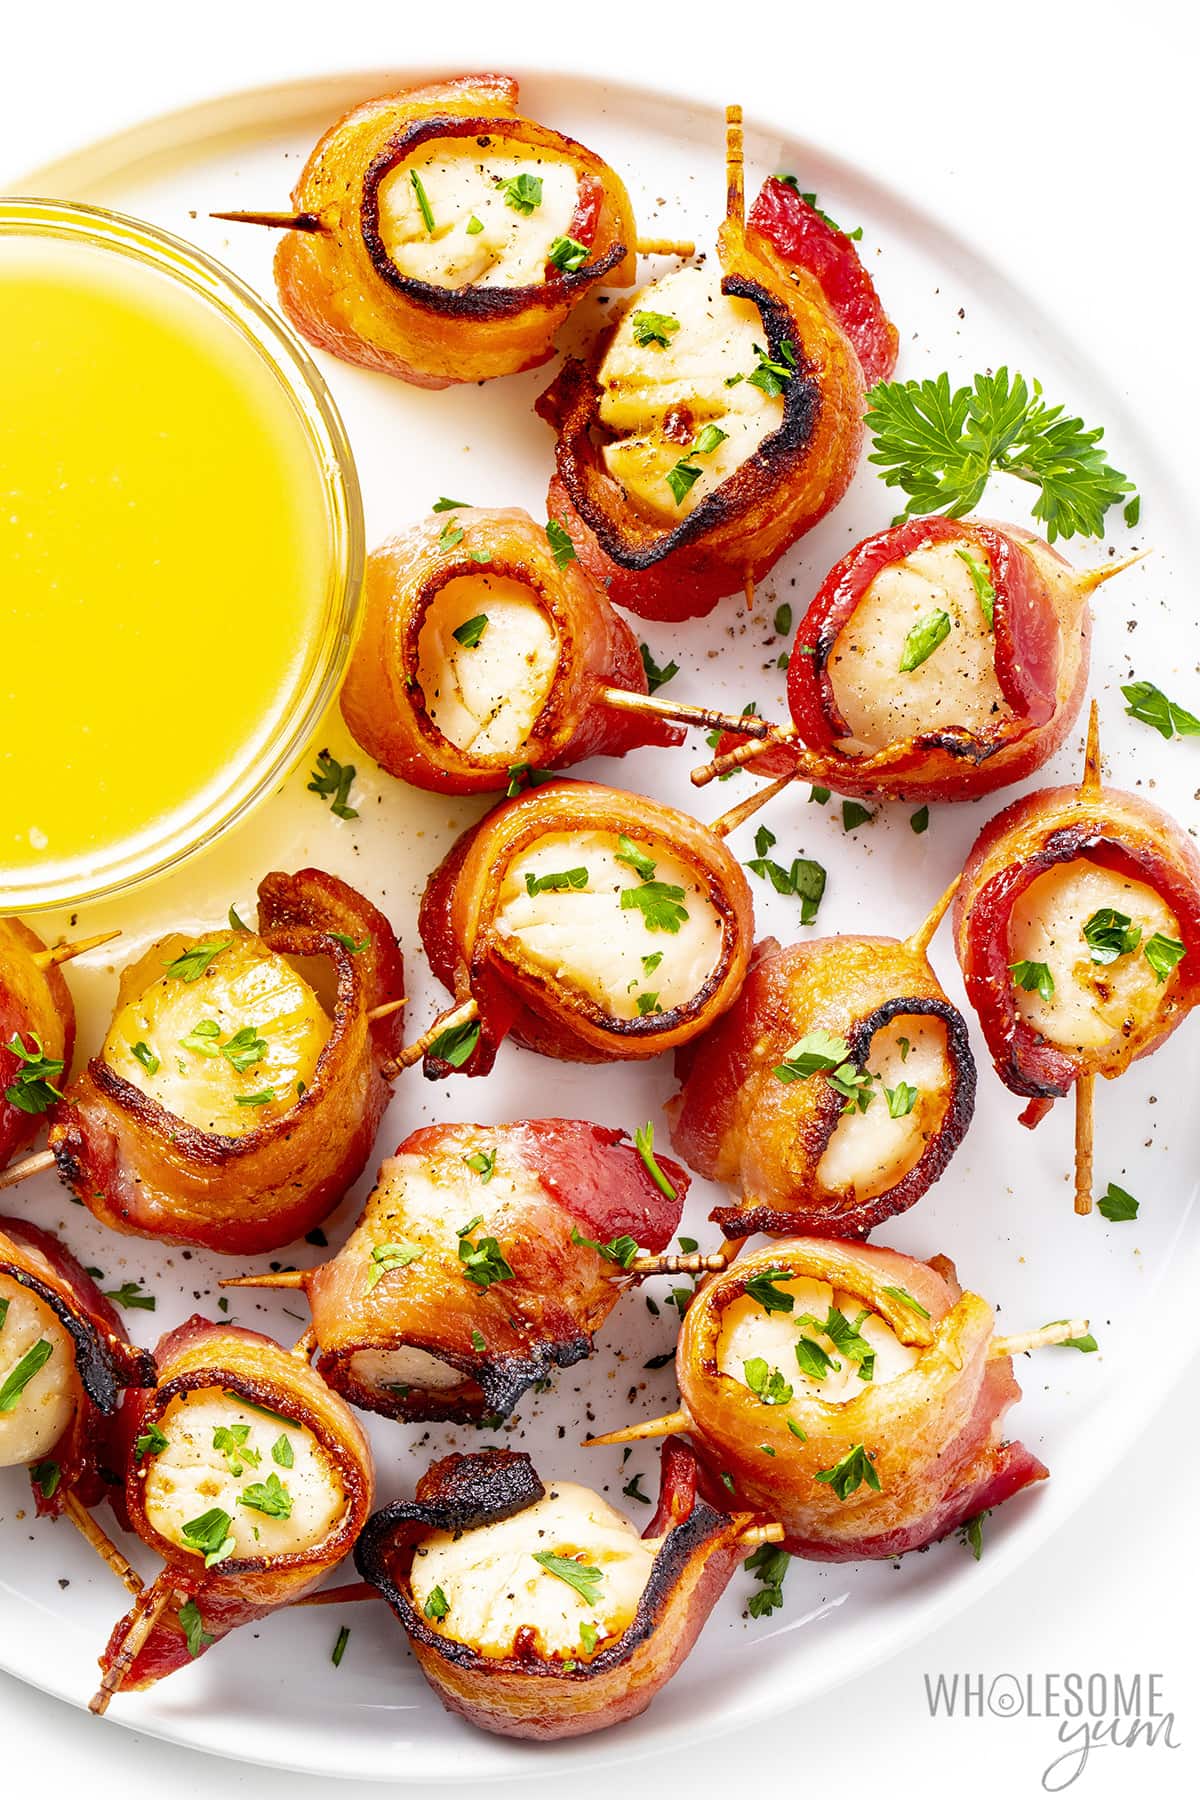 Bacon wrapped scallops piled together on a plate and sprinkled with parsley.